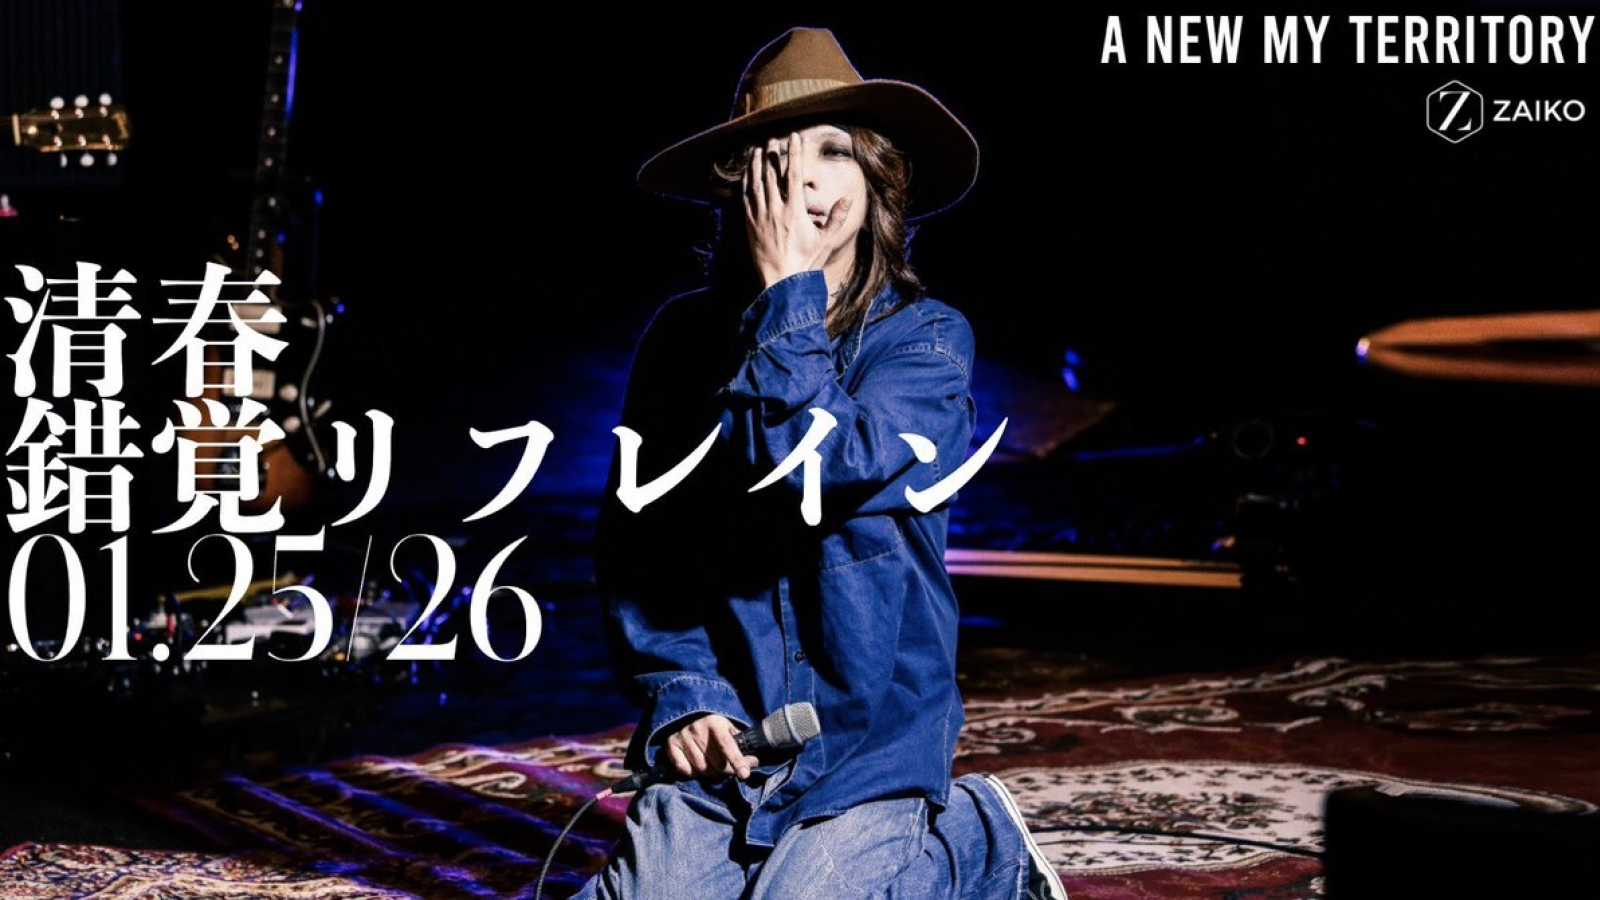 Kiyoharu to Livestream Two "A NEW MY TERRITORY" Concerts © Loyal Code Artists. All rights reserved.